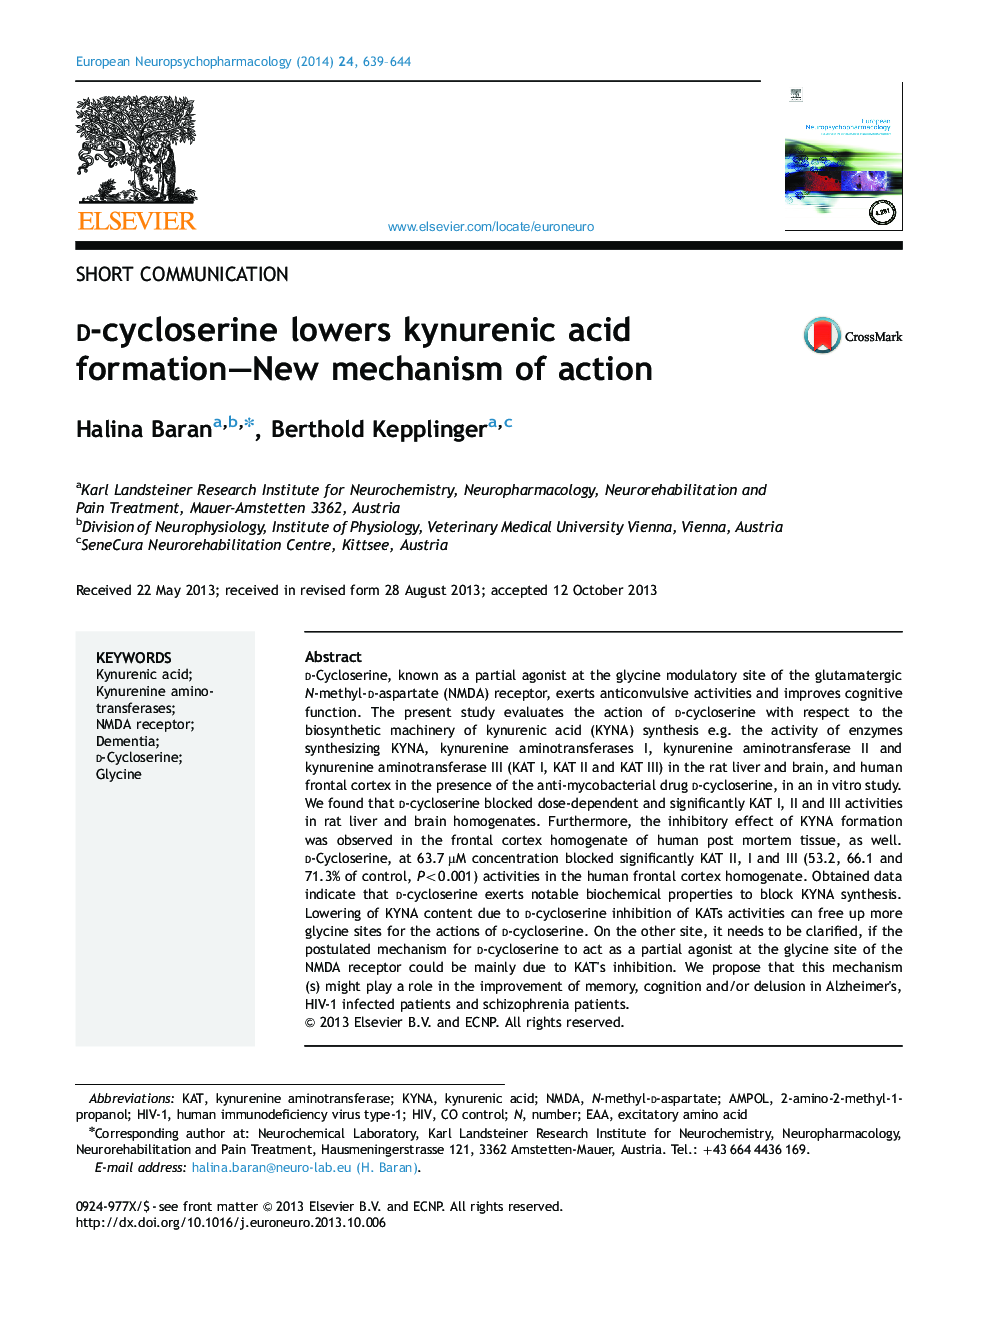 d-cycloserine lowers kynurenic acid formation-New mechanism of action